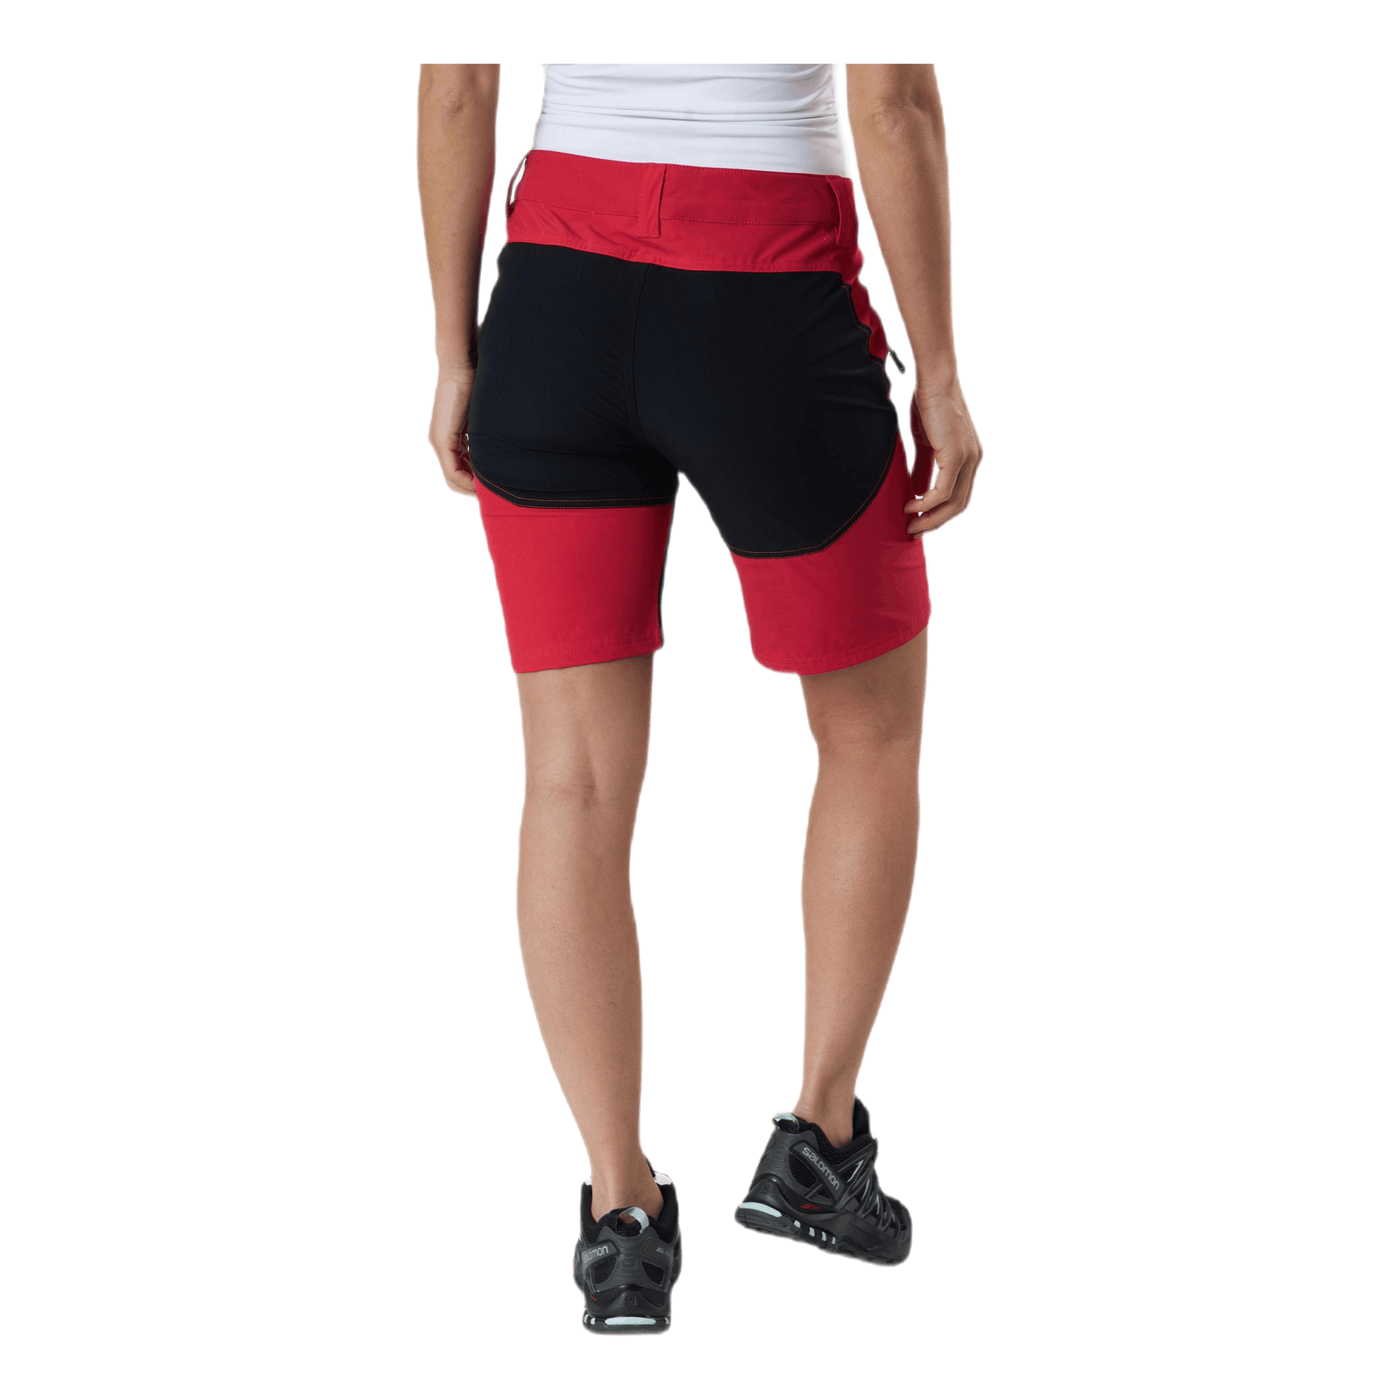 Flexi Lady Shorts Red